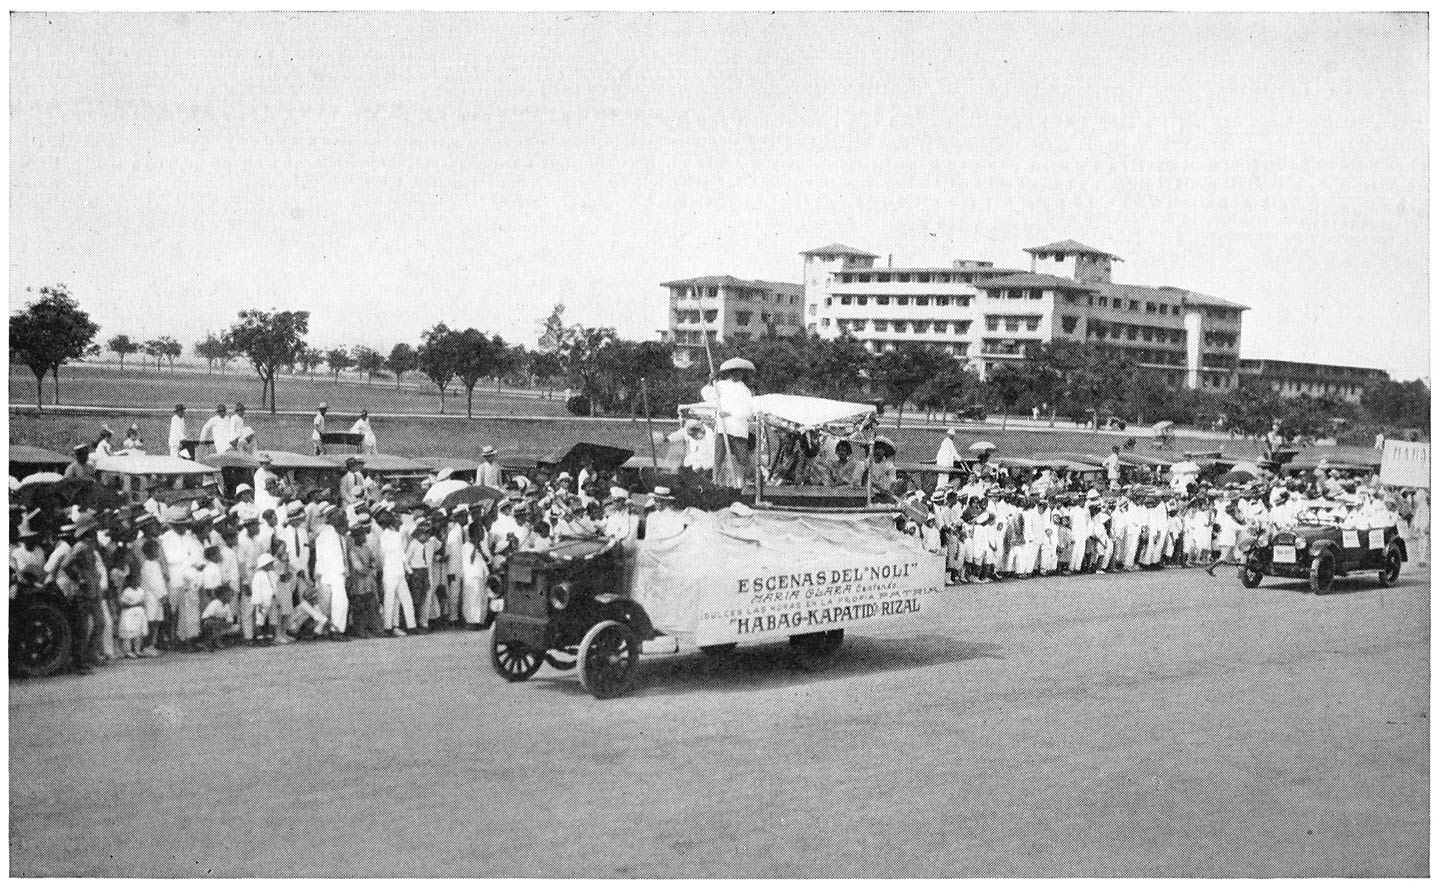 A FLOAT, RIZAL DAY, DECEMBER 30, 1922